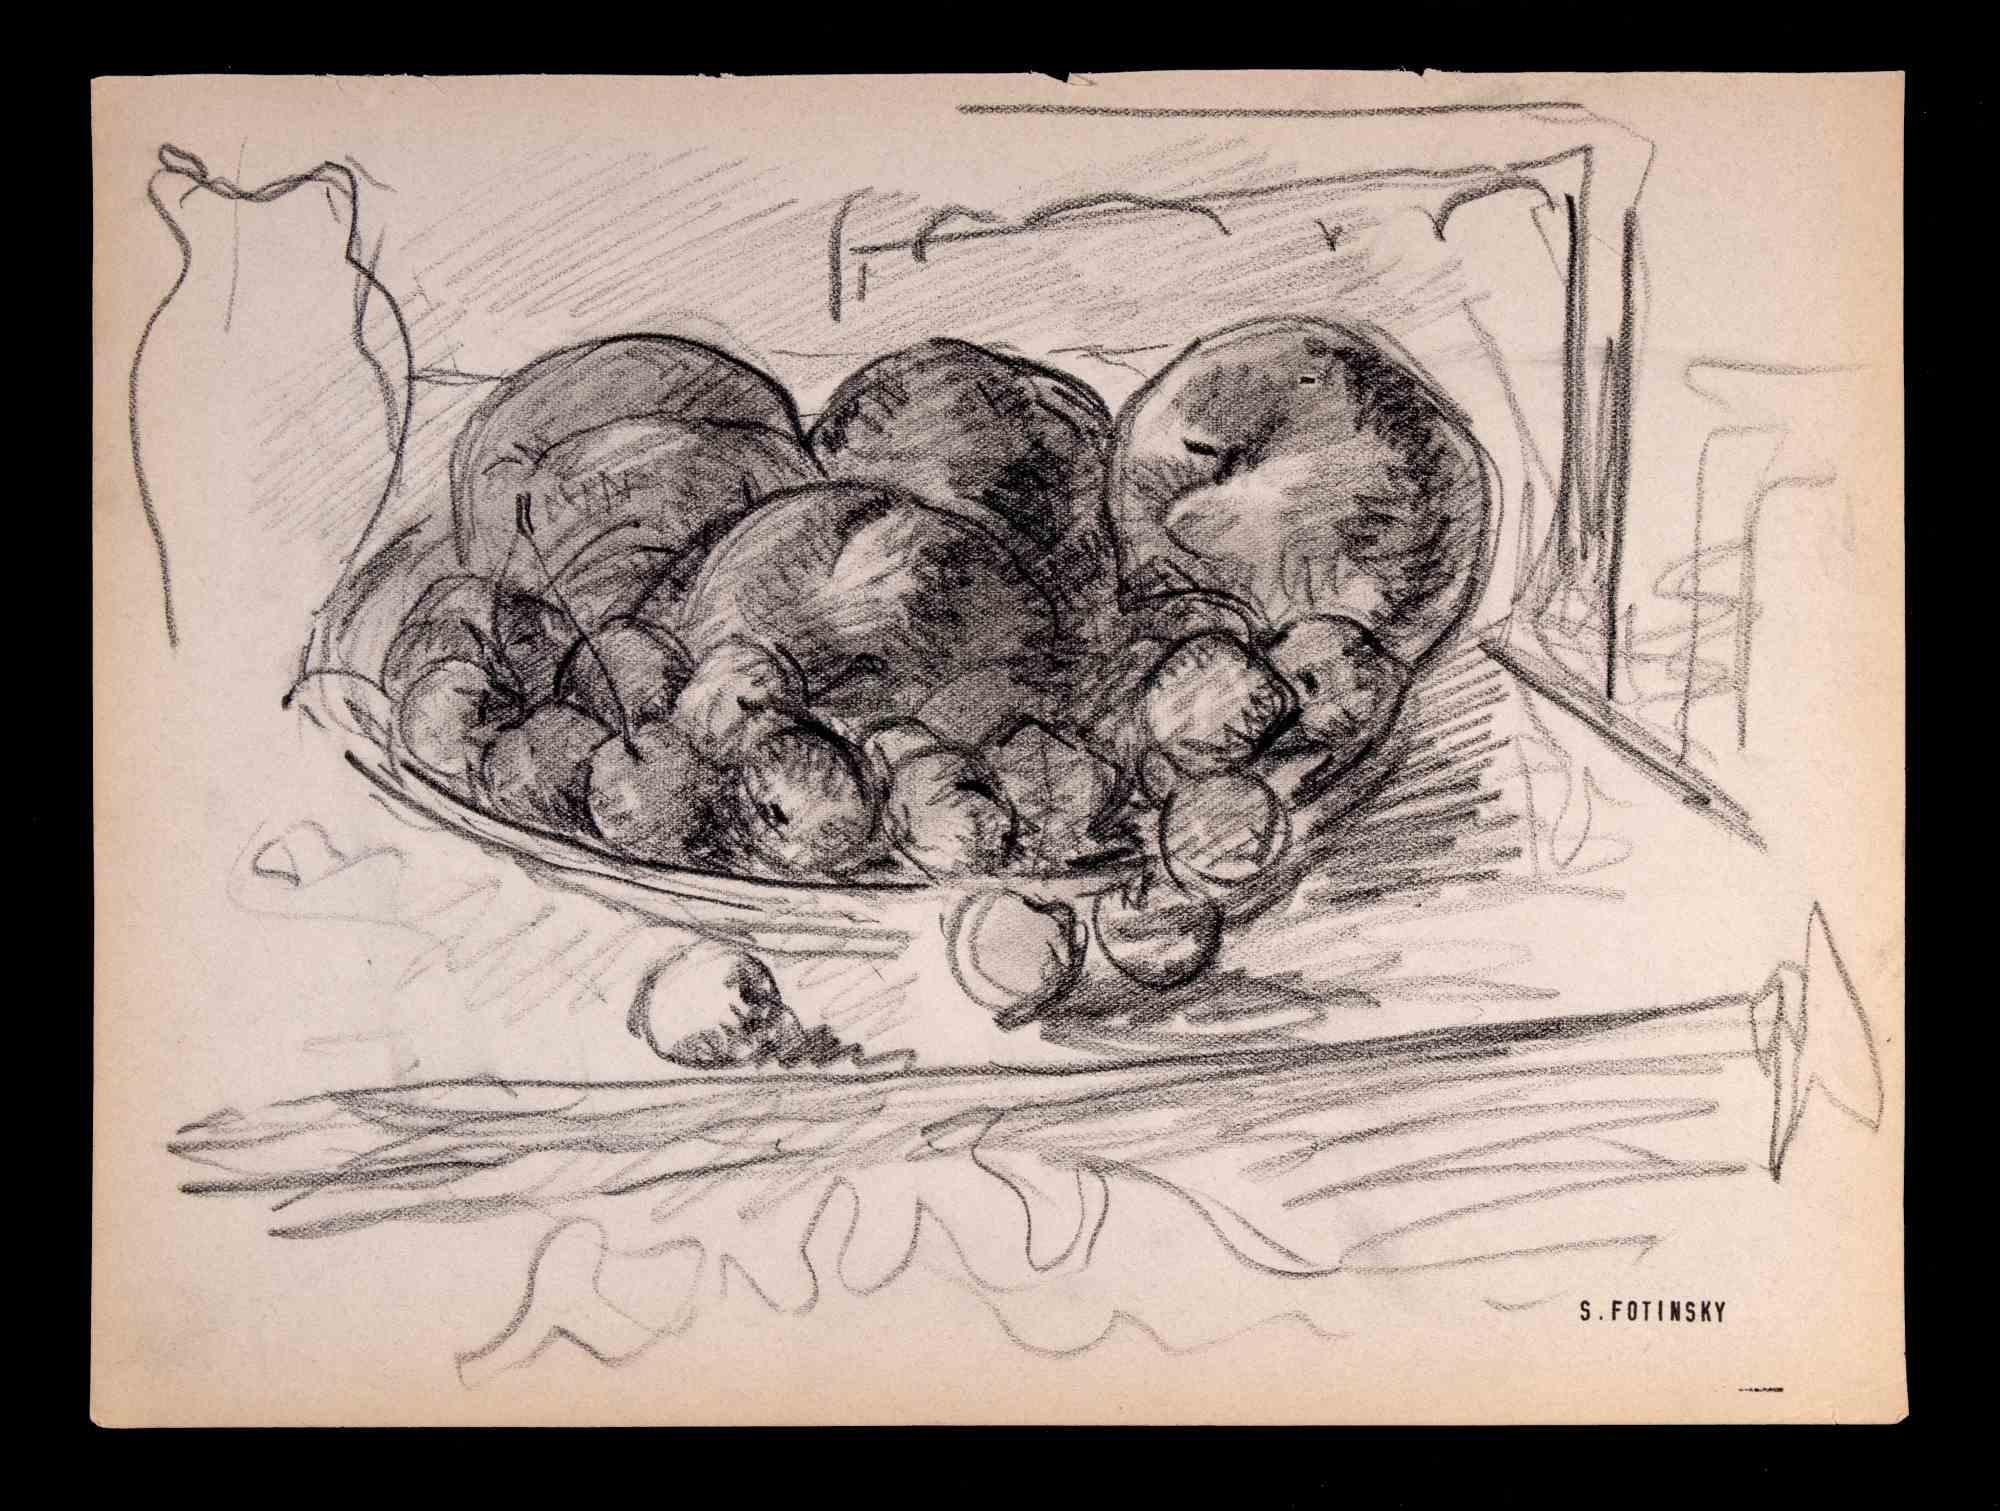 Still life is an artwork realized by Serge Fotinsky in 1947. 

Original drawing in pencil.

Signature lower right.

20 x 27 cm.

Good conditions escept for some yellowing due by time.